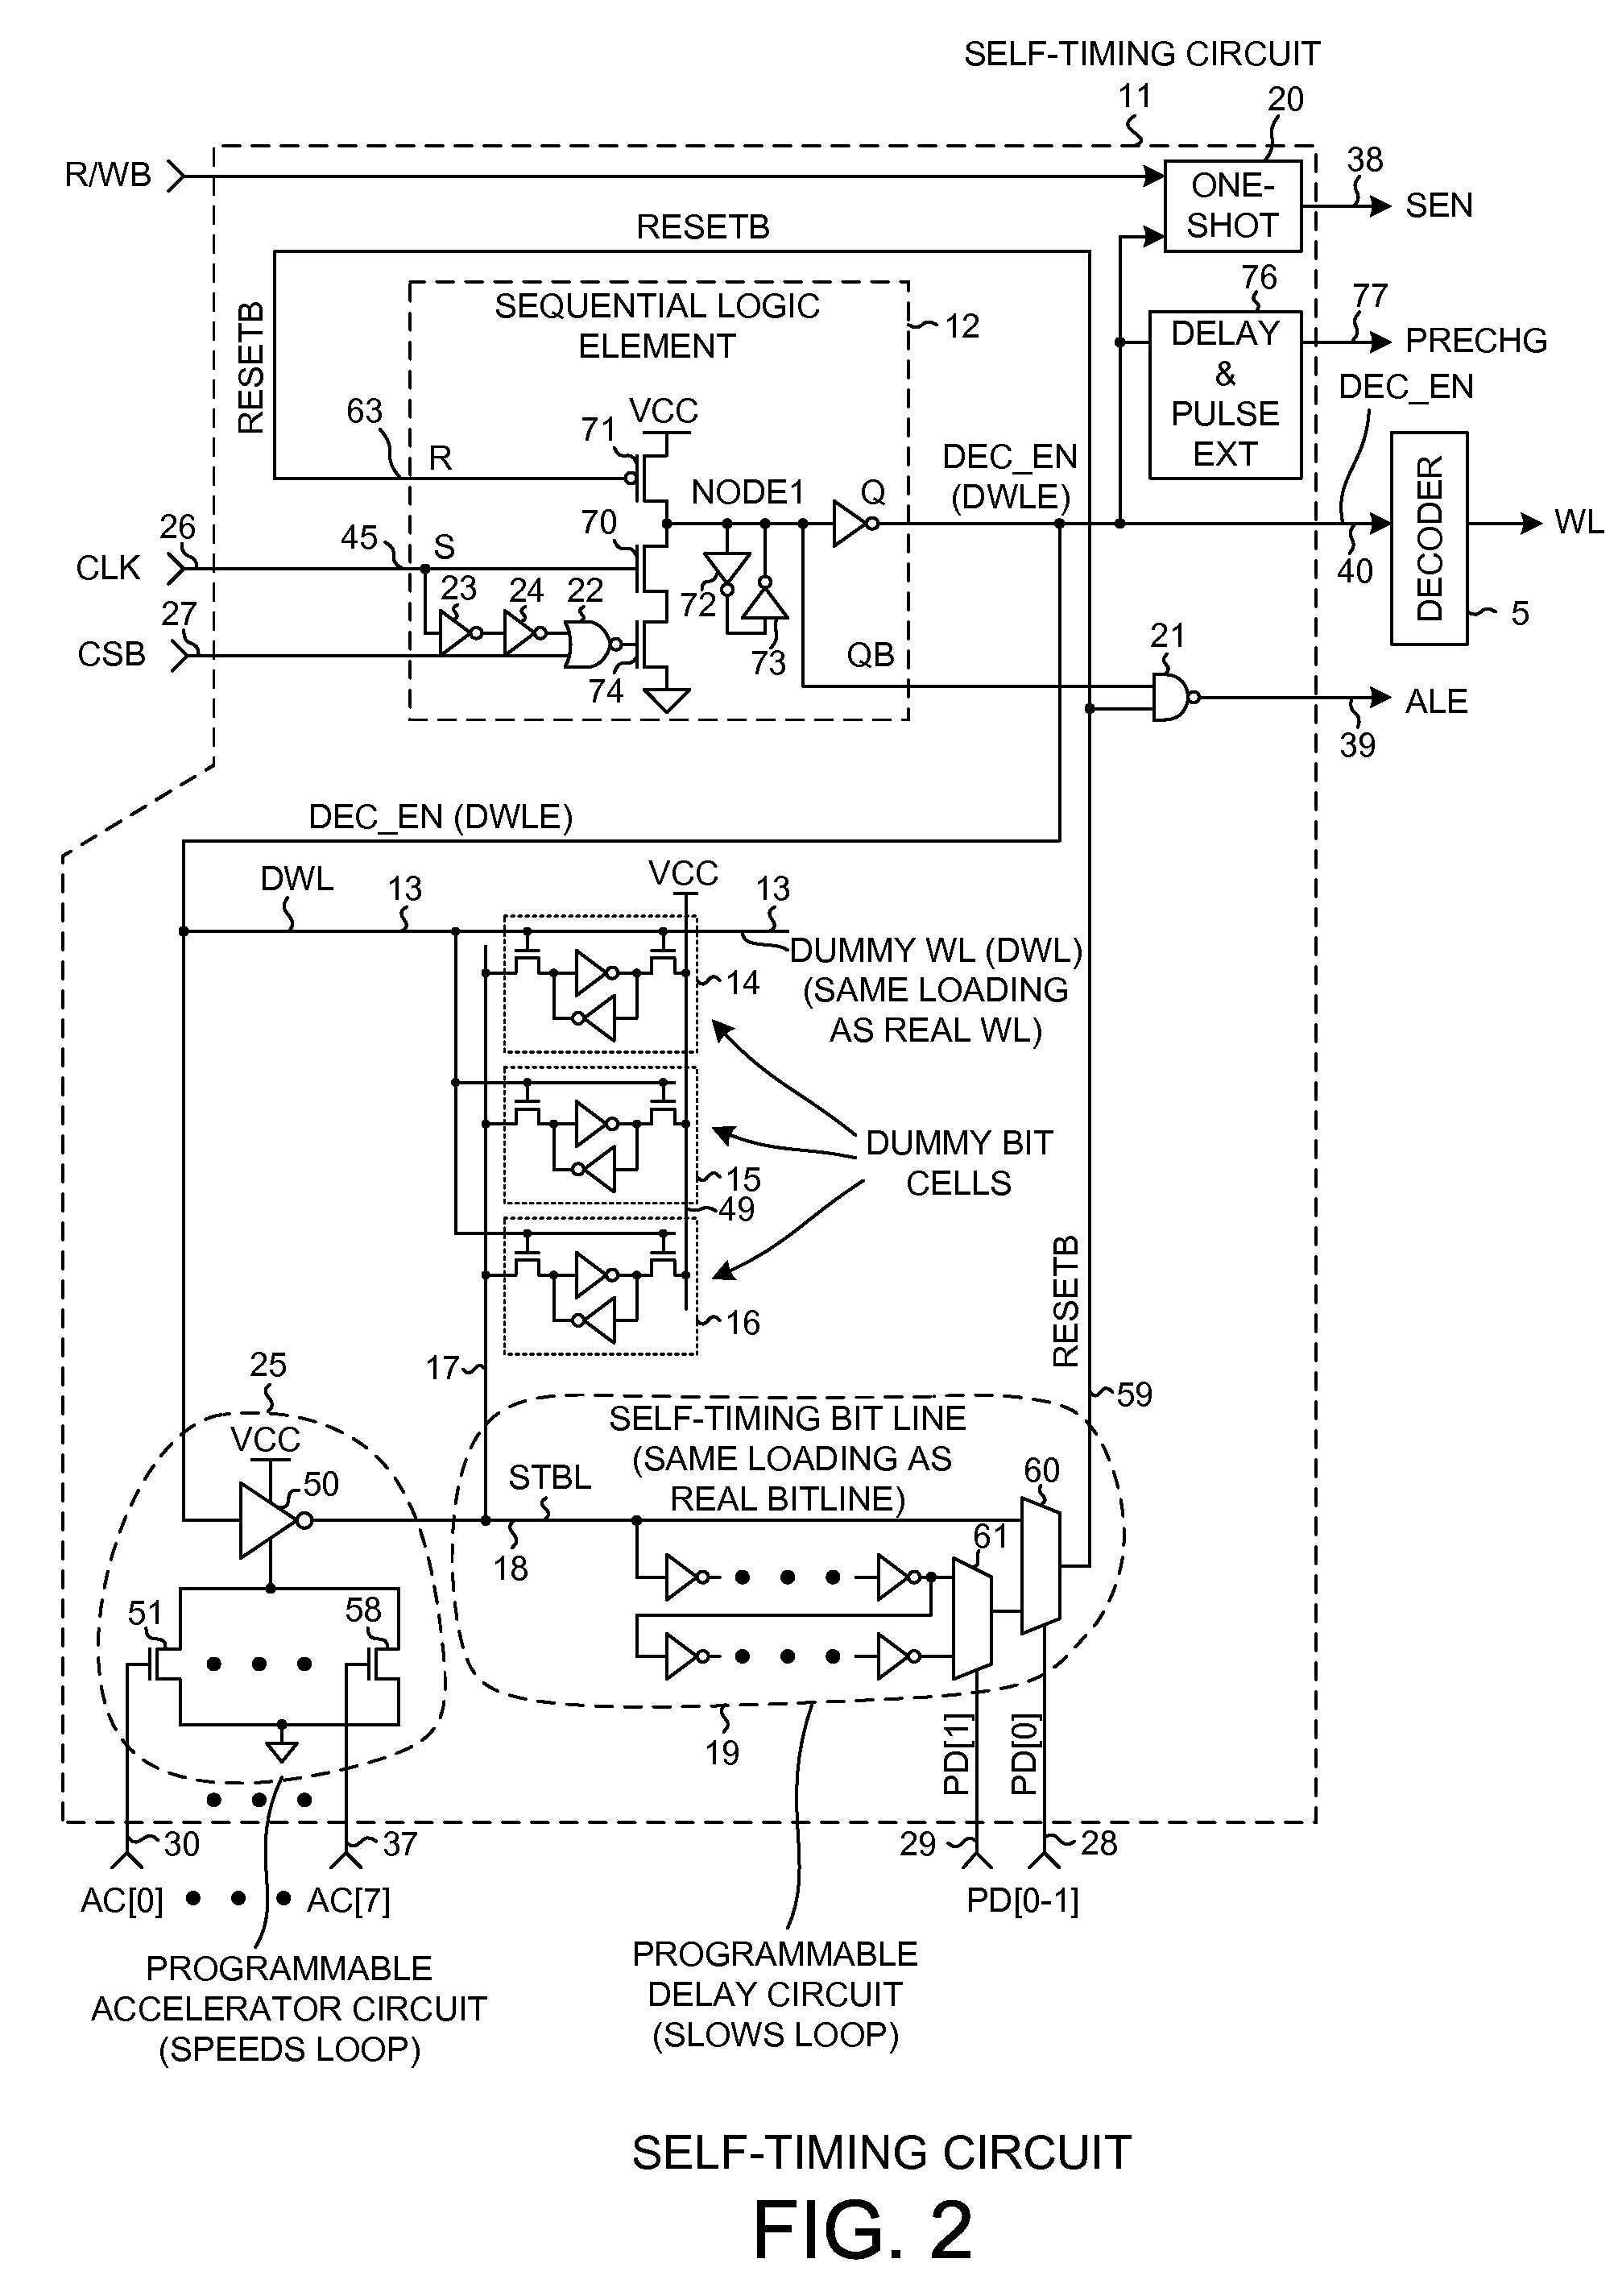 Self-timing circuit with programmable delay and programmable accelerator circuits